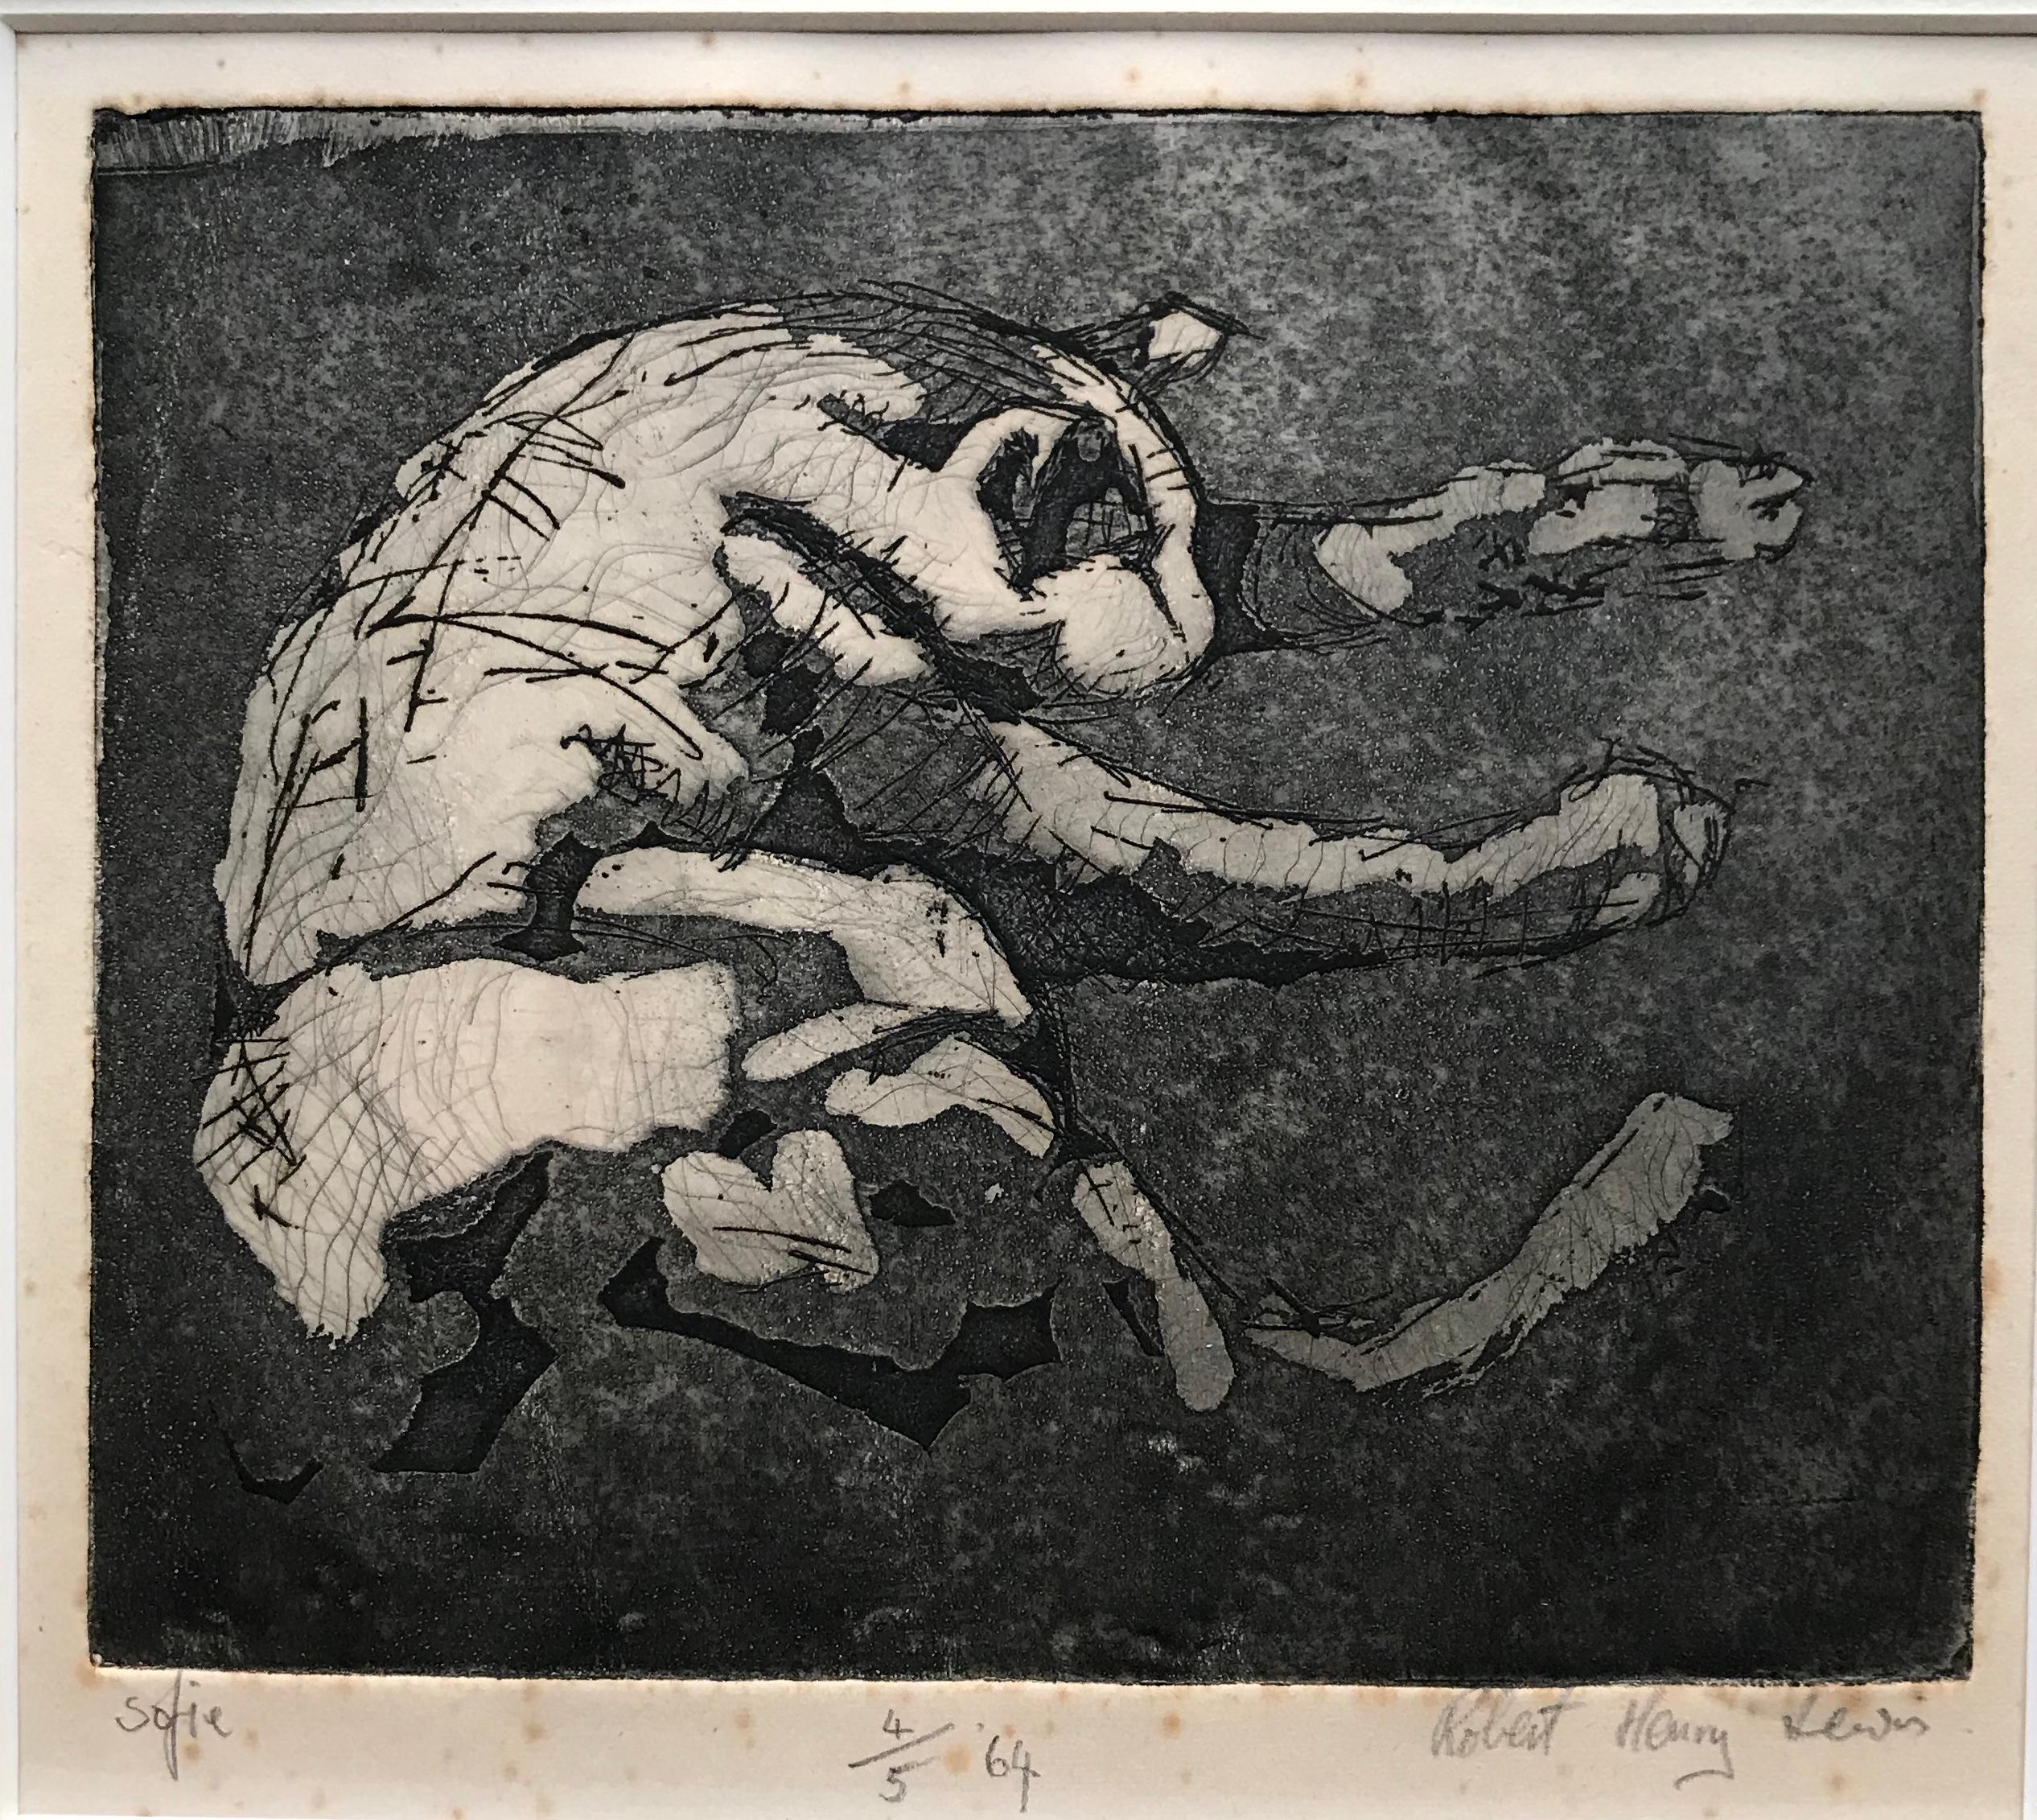 Robert Henry Lewis (mid 20th Century)
"Sofie: : A sleeping cat
Signed, numbered 4/5 and dated "(19)64" beneath in image in pencil
Titled, "Sofie"
Etching
5.5 x 6.5 inches (image)
14.5 x 14.5 inches including the frame

A delightful and stylishly